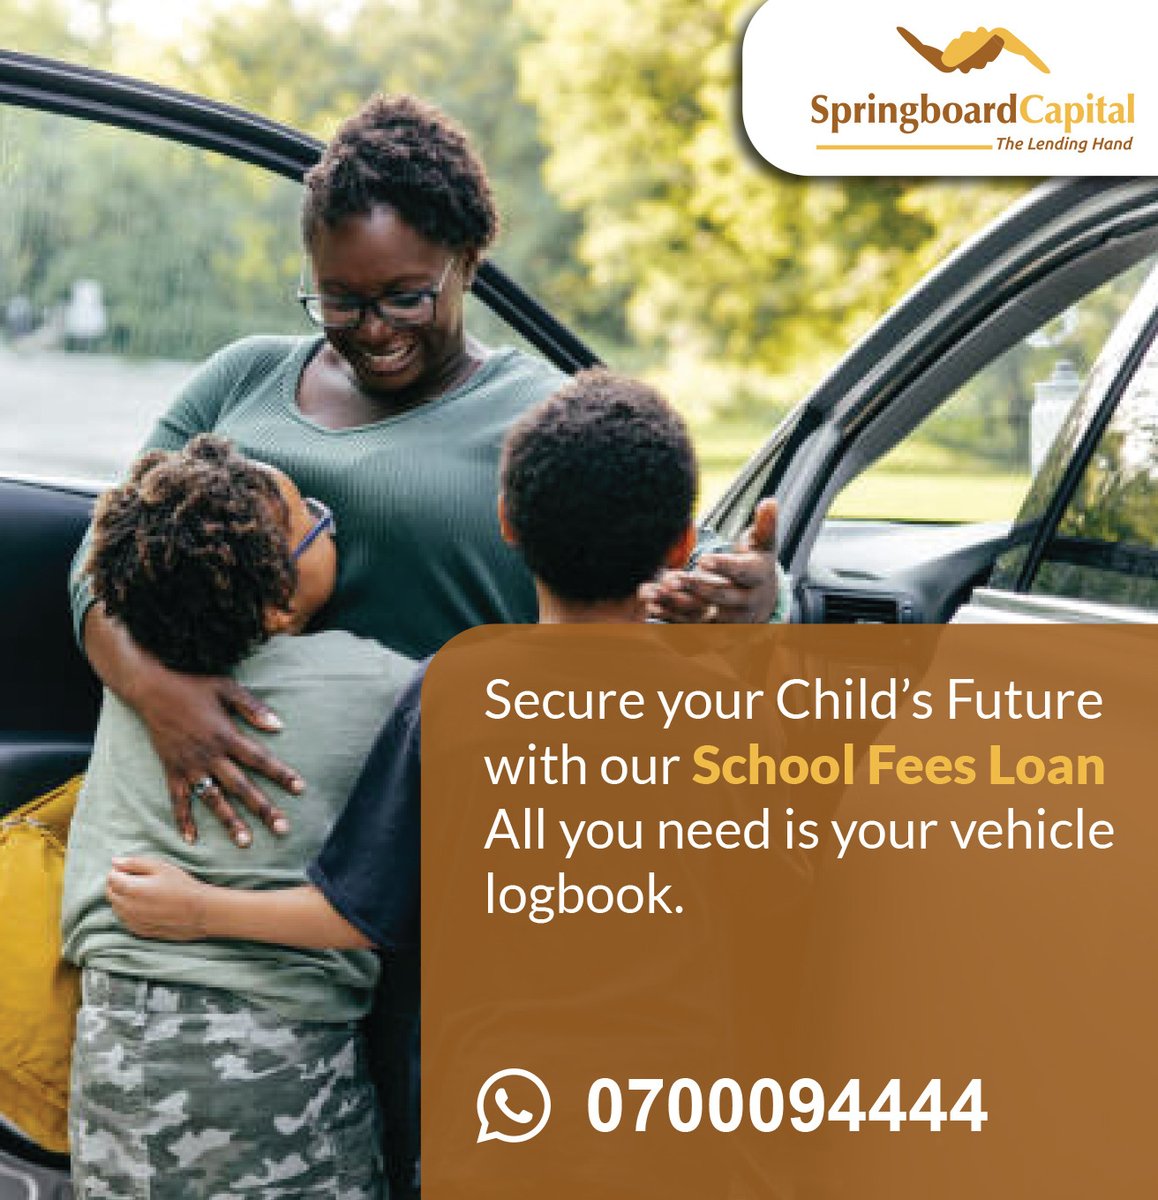 It's Back to School Season!📚Stressed about school fees? Worry not for we've got your back. Apply for the School Fees Loan today and secure your child's future. Visit our website: springboardcapital.co.ke/school-fees-lo… or Call/WhatsApp 0700094444 to Appy. #SBC #TheLendingHand #SchoolFeesLoan